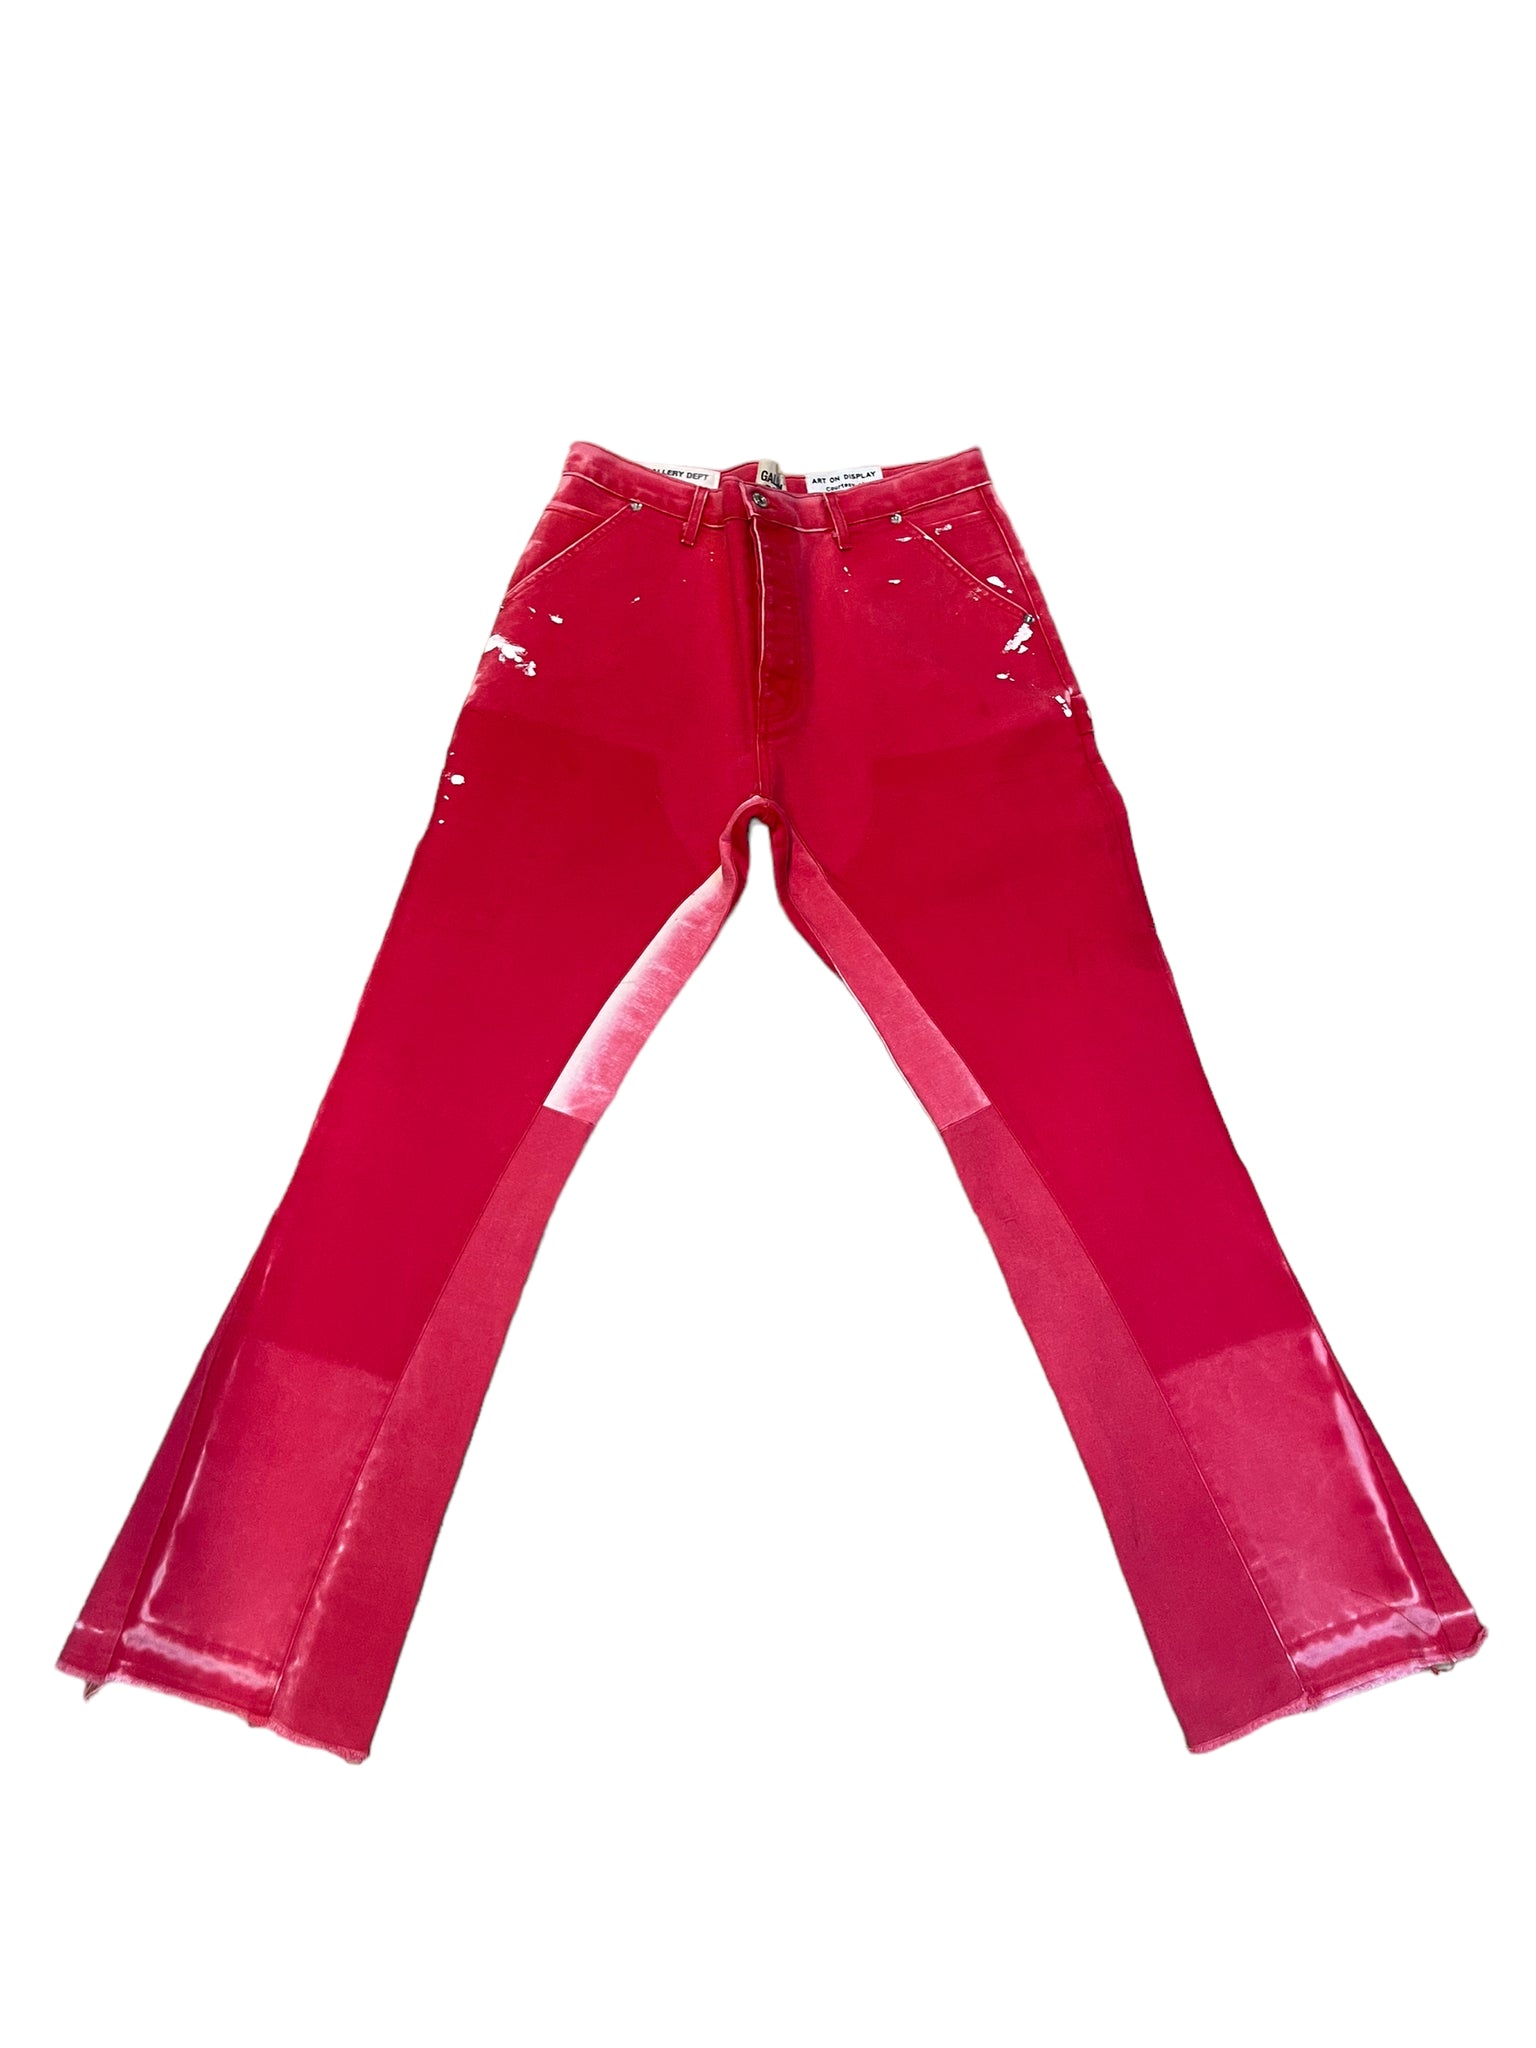 Gallery Dept Flared Jeans "Red"